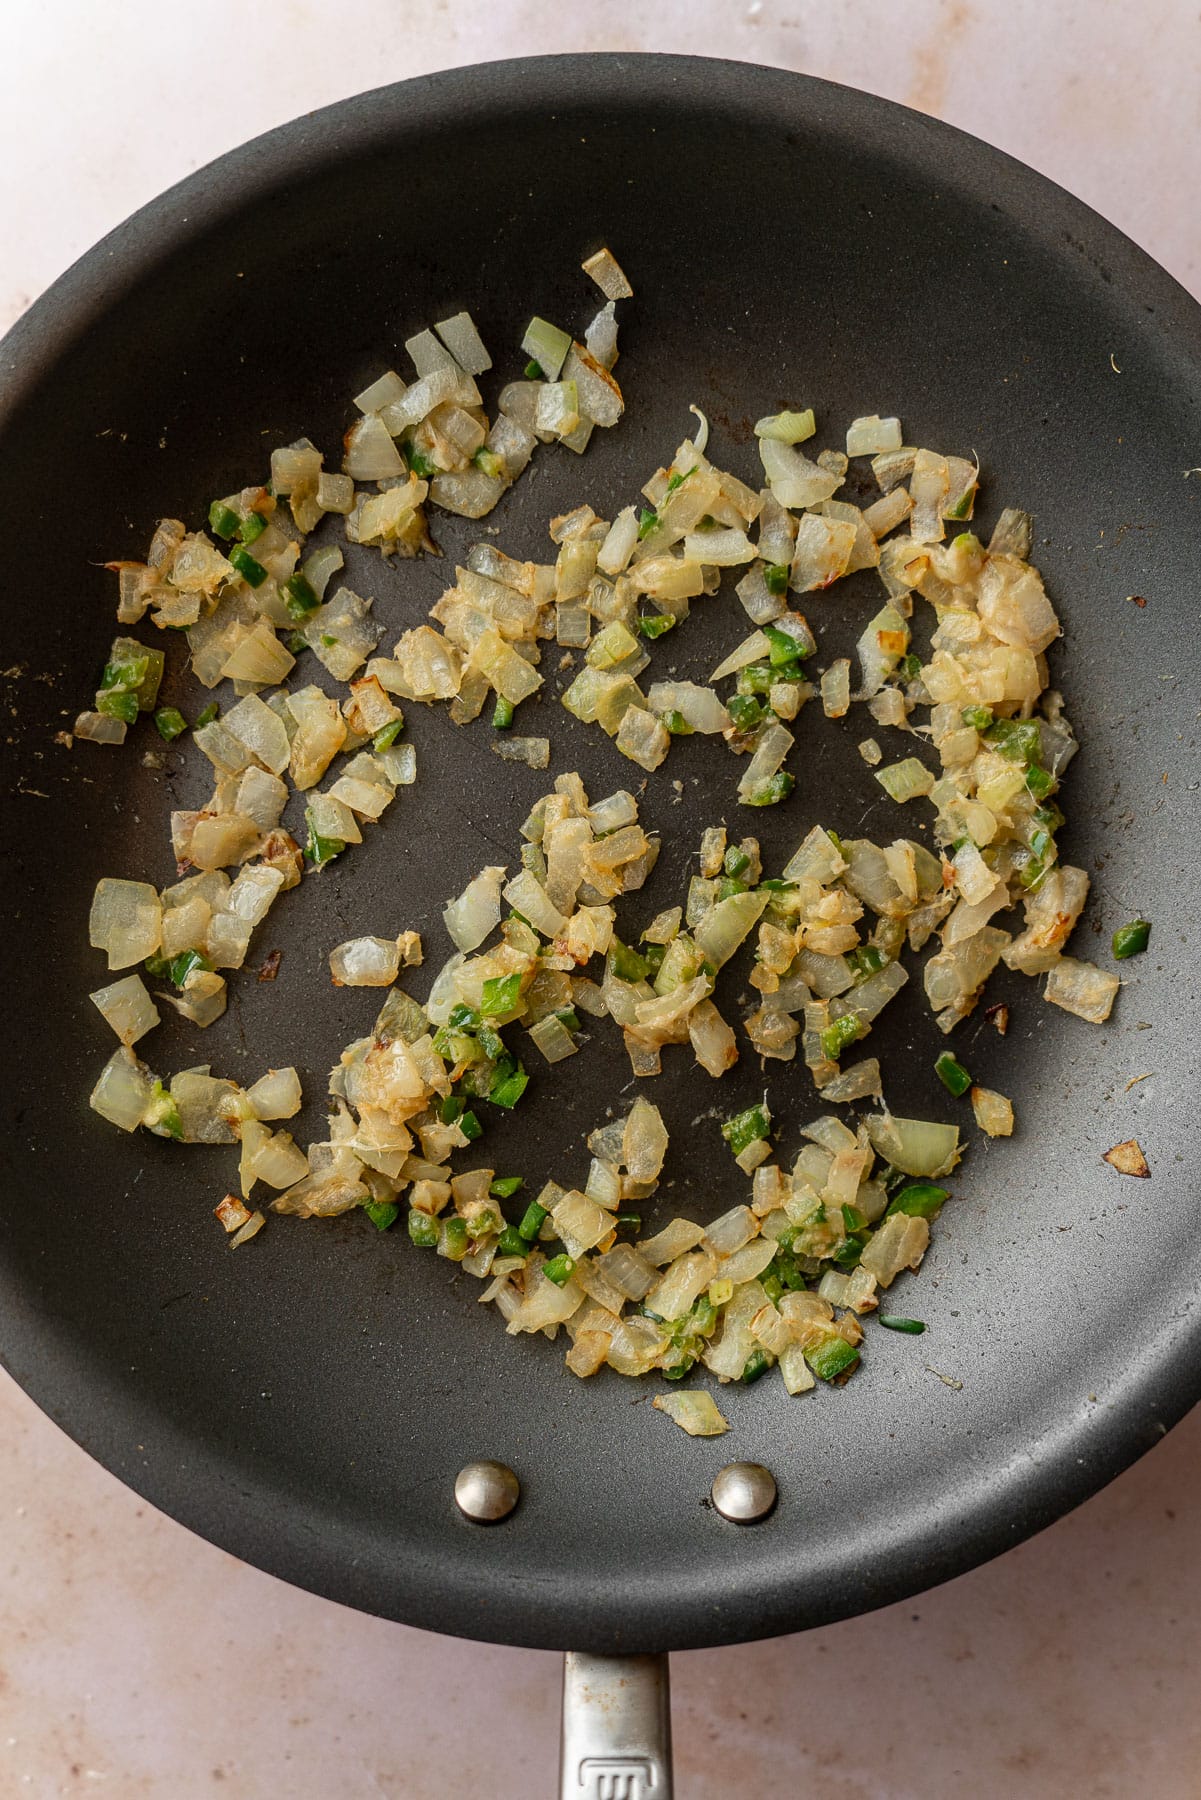 Sauteed translucent onions and green chilis in a nonstick pan.